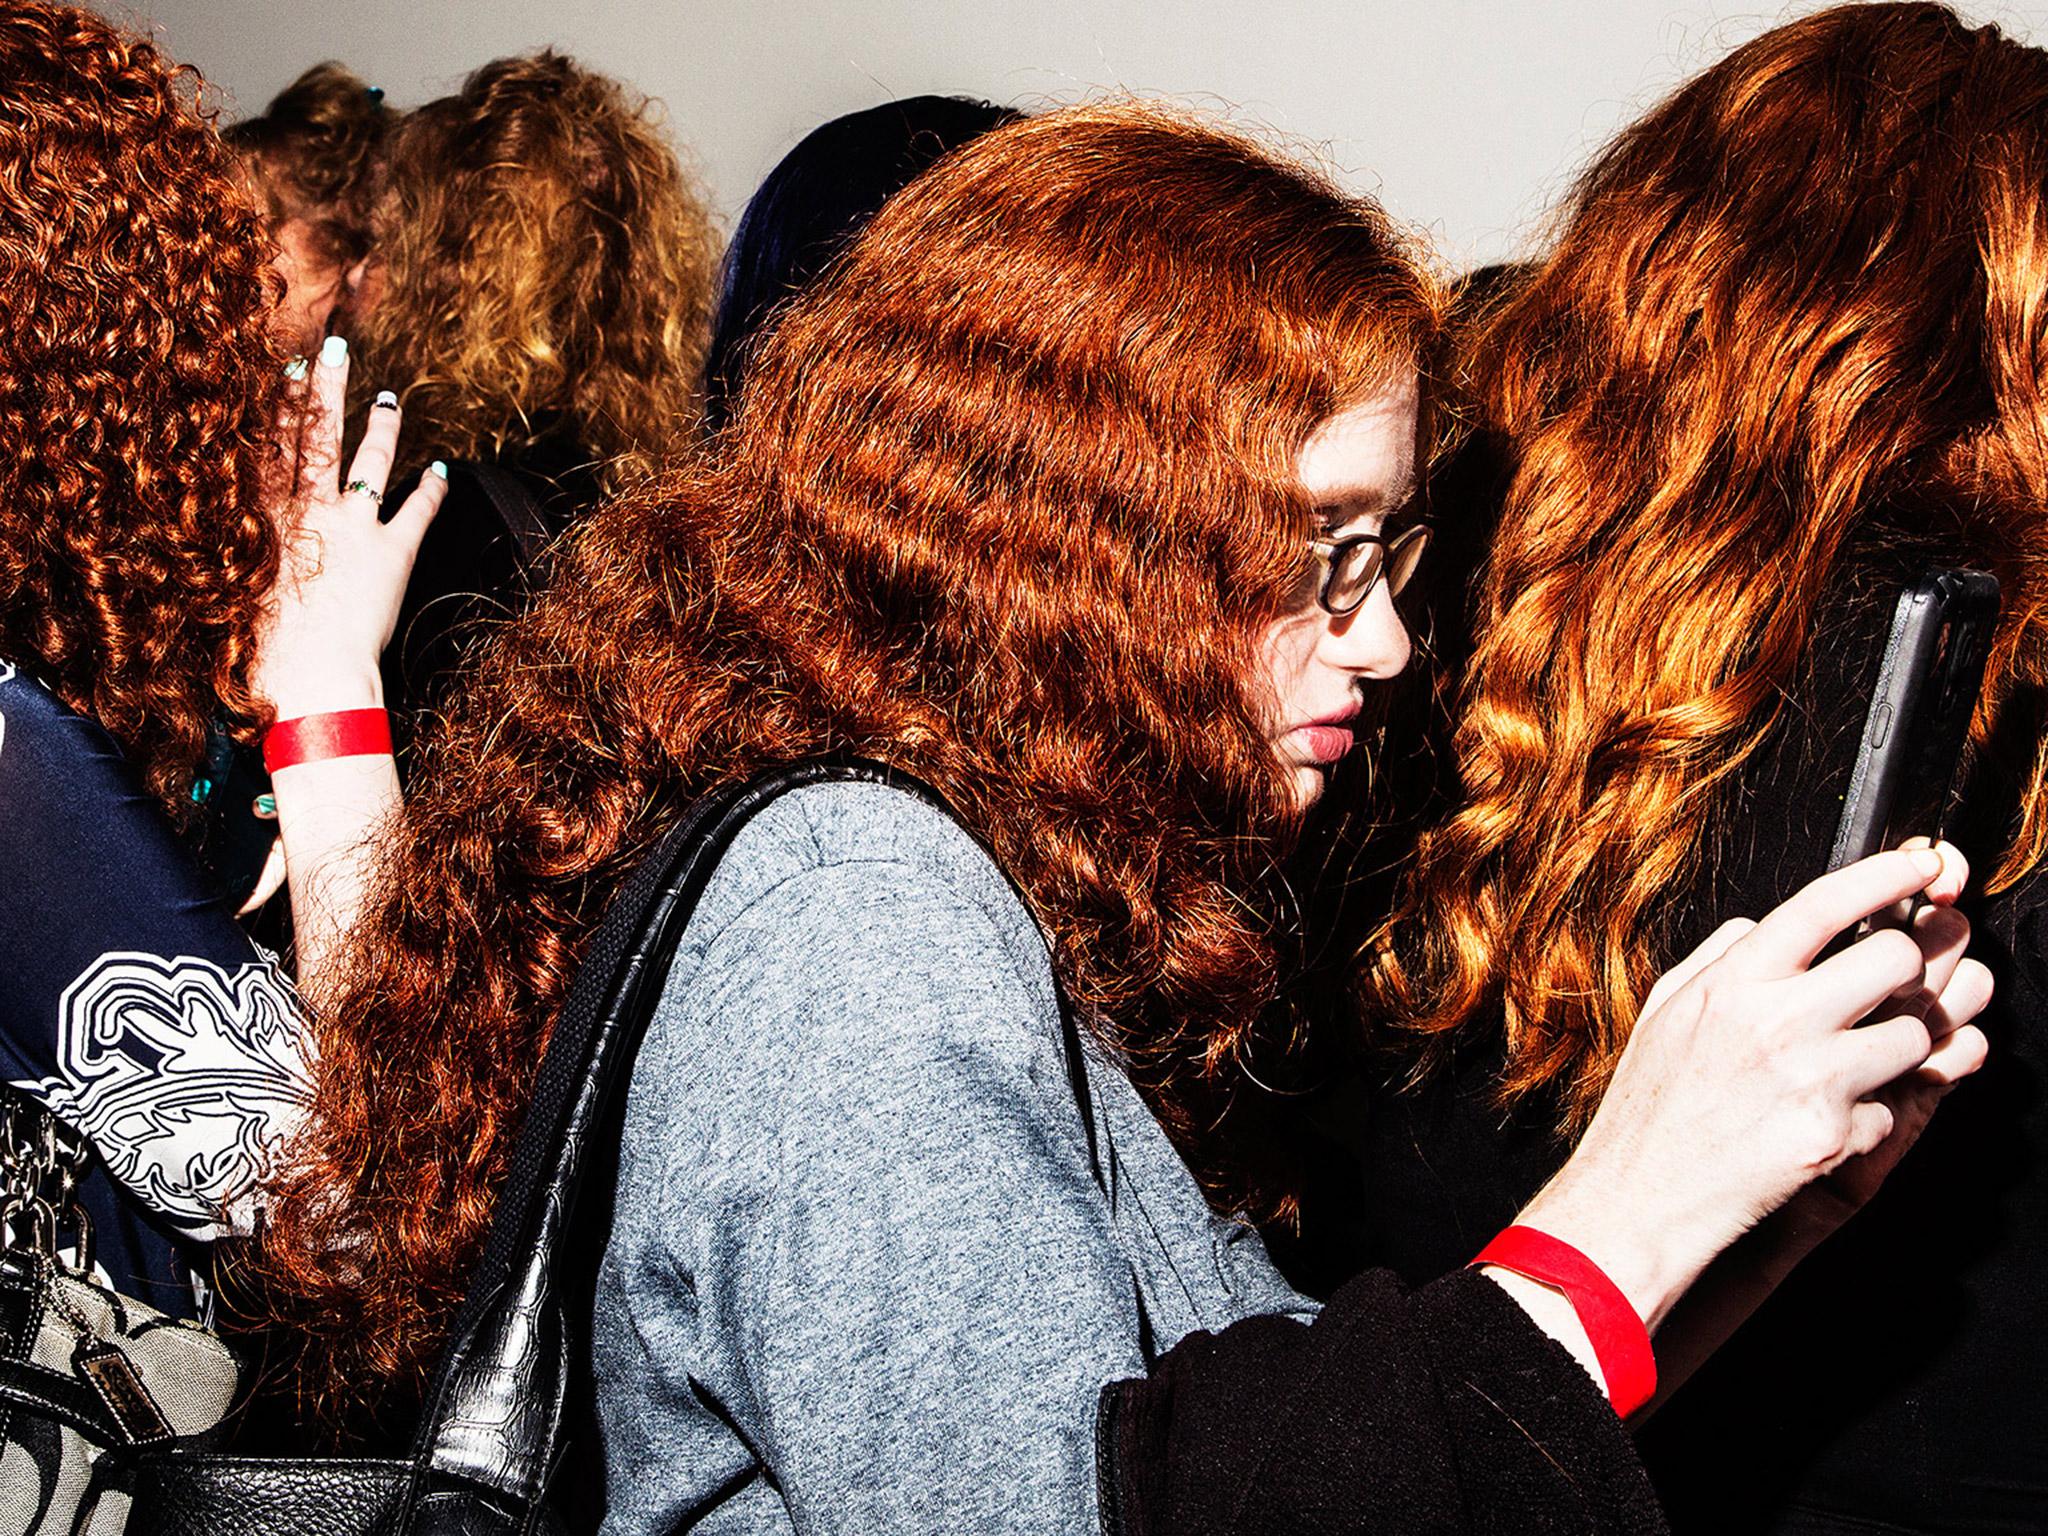 Photographer Amy Lombard has captured moments between communities, including people with red hair